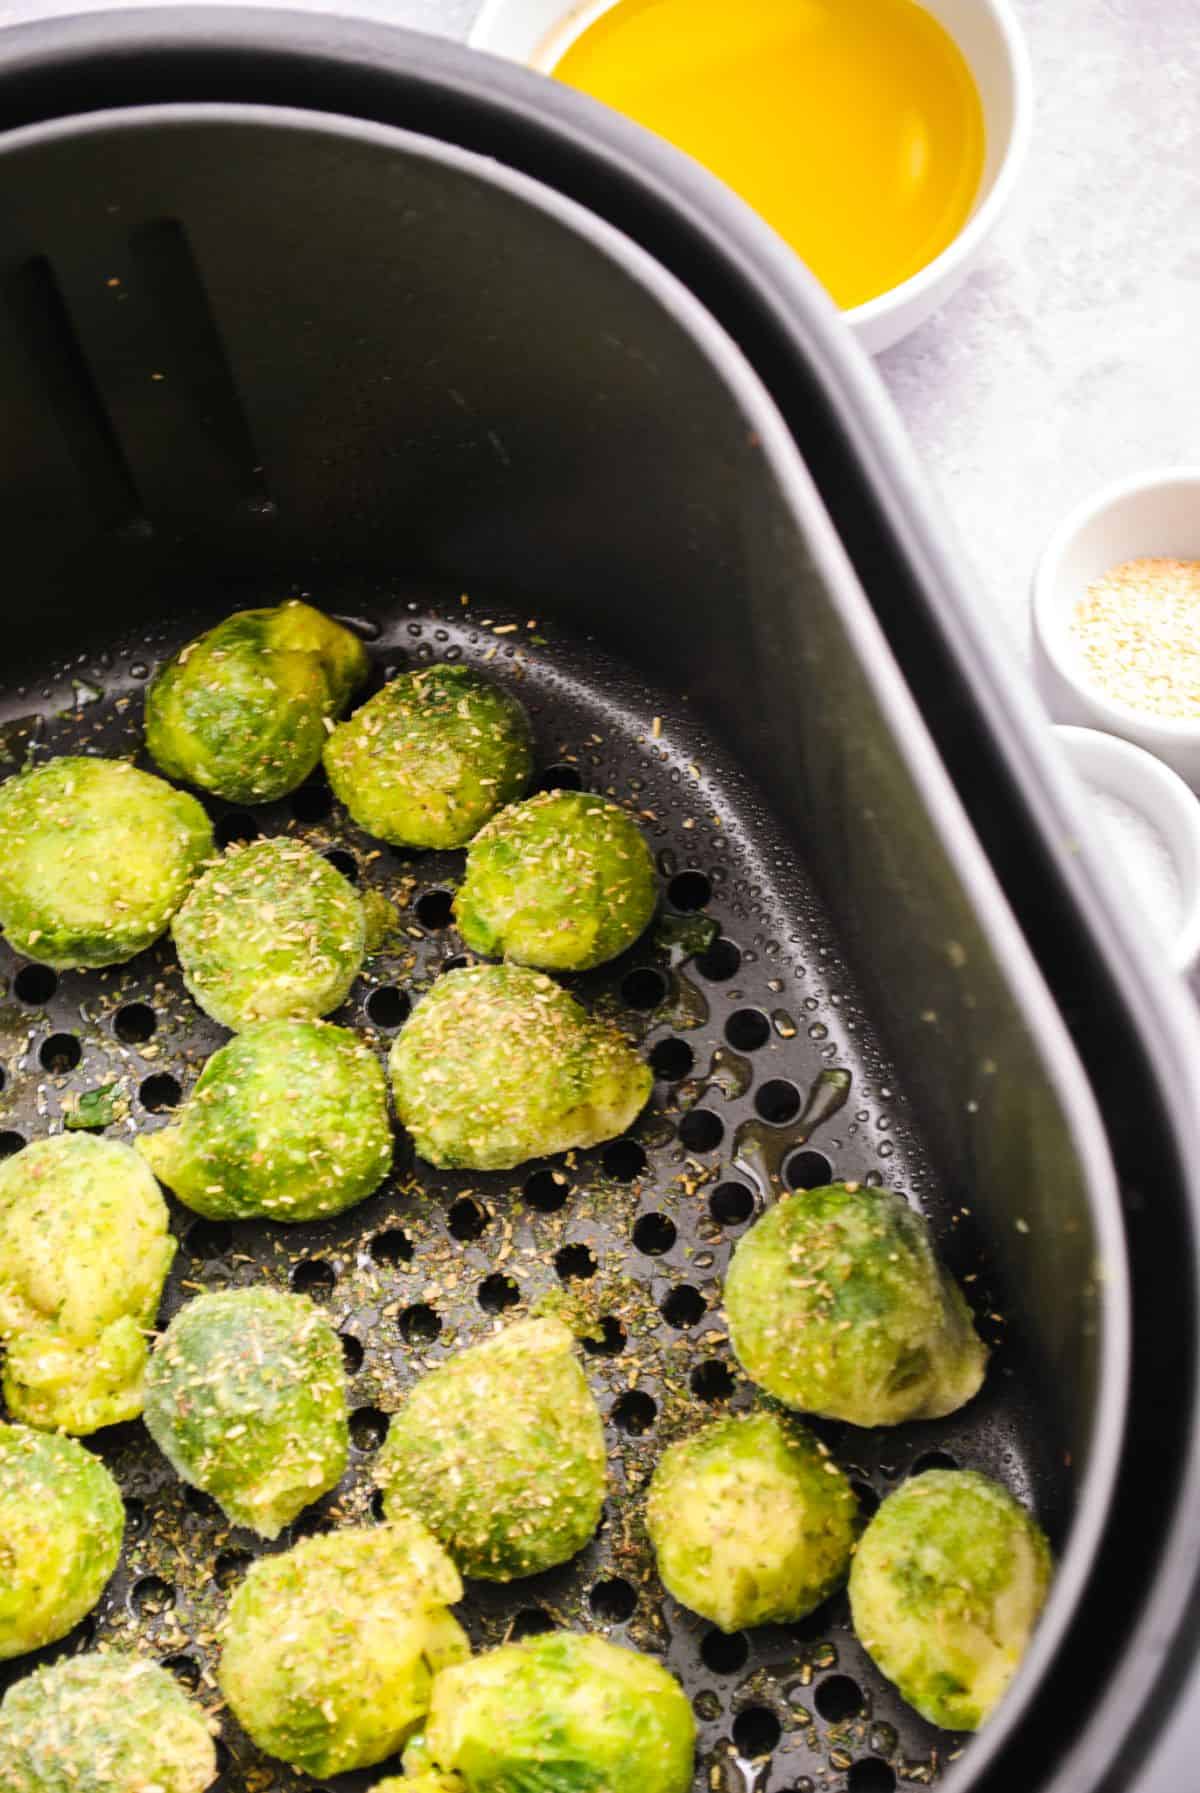 Air Fryer frozen Brussel sprouts step 1.1